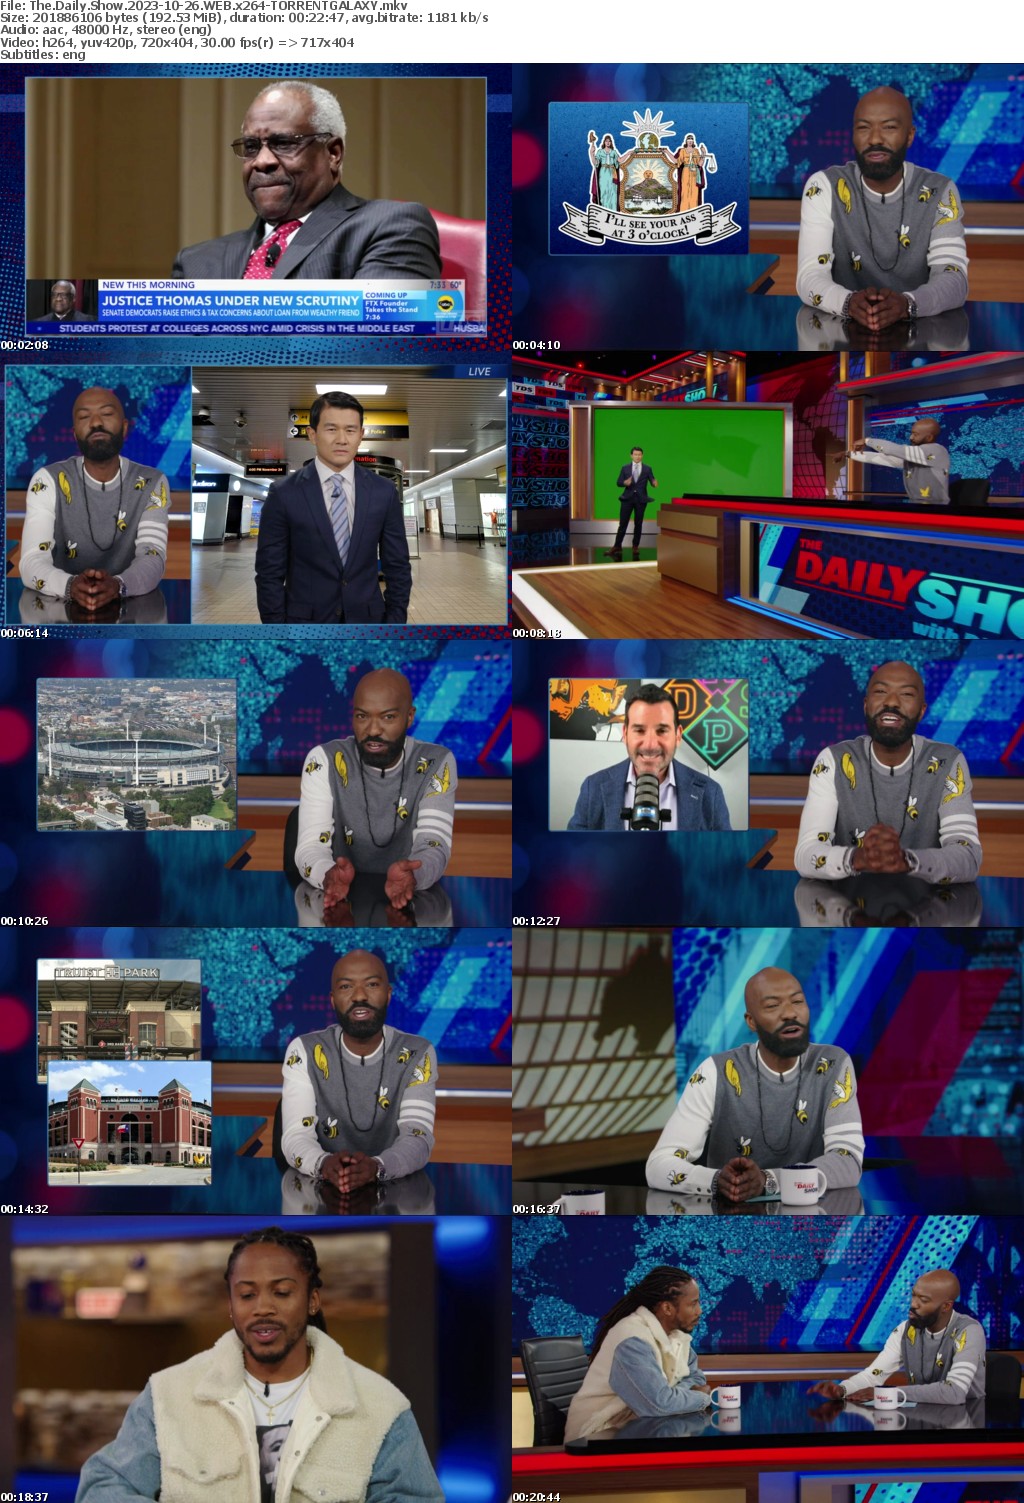 The Daily Show 2023-10-26 WEB x264-GALAXY